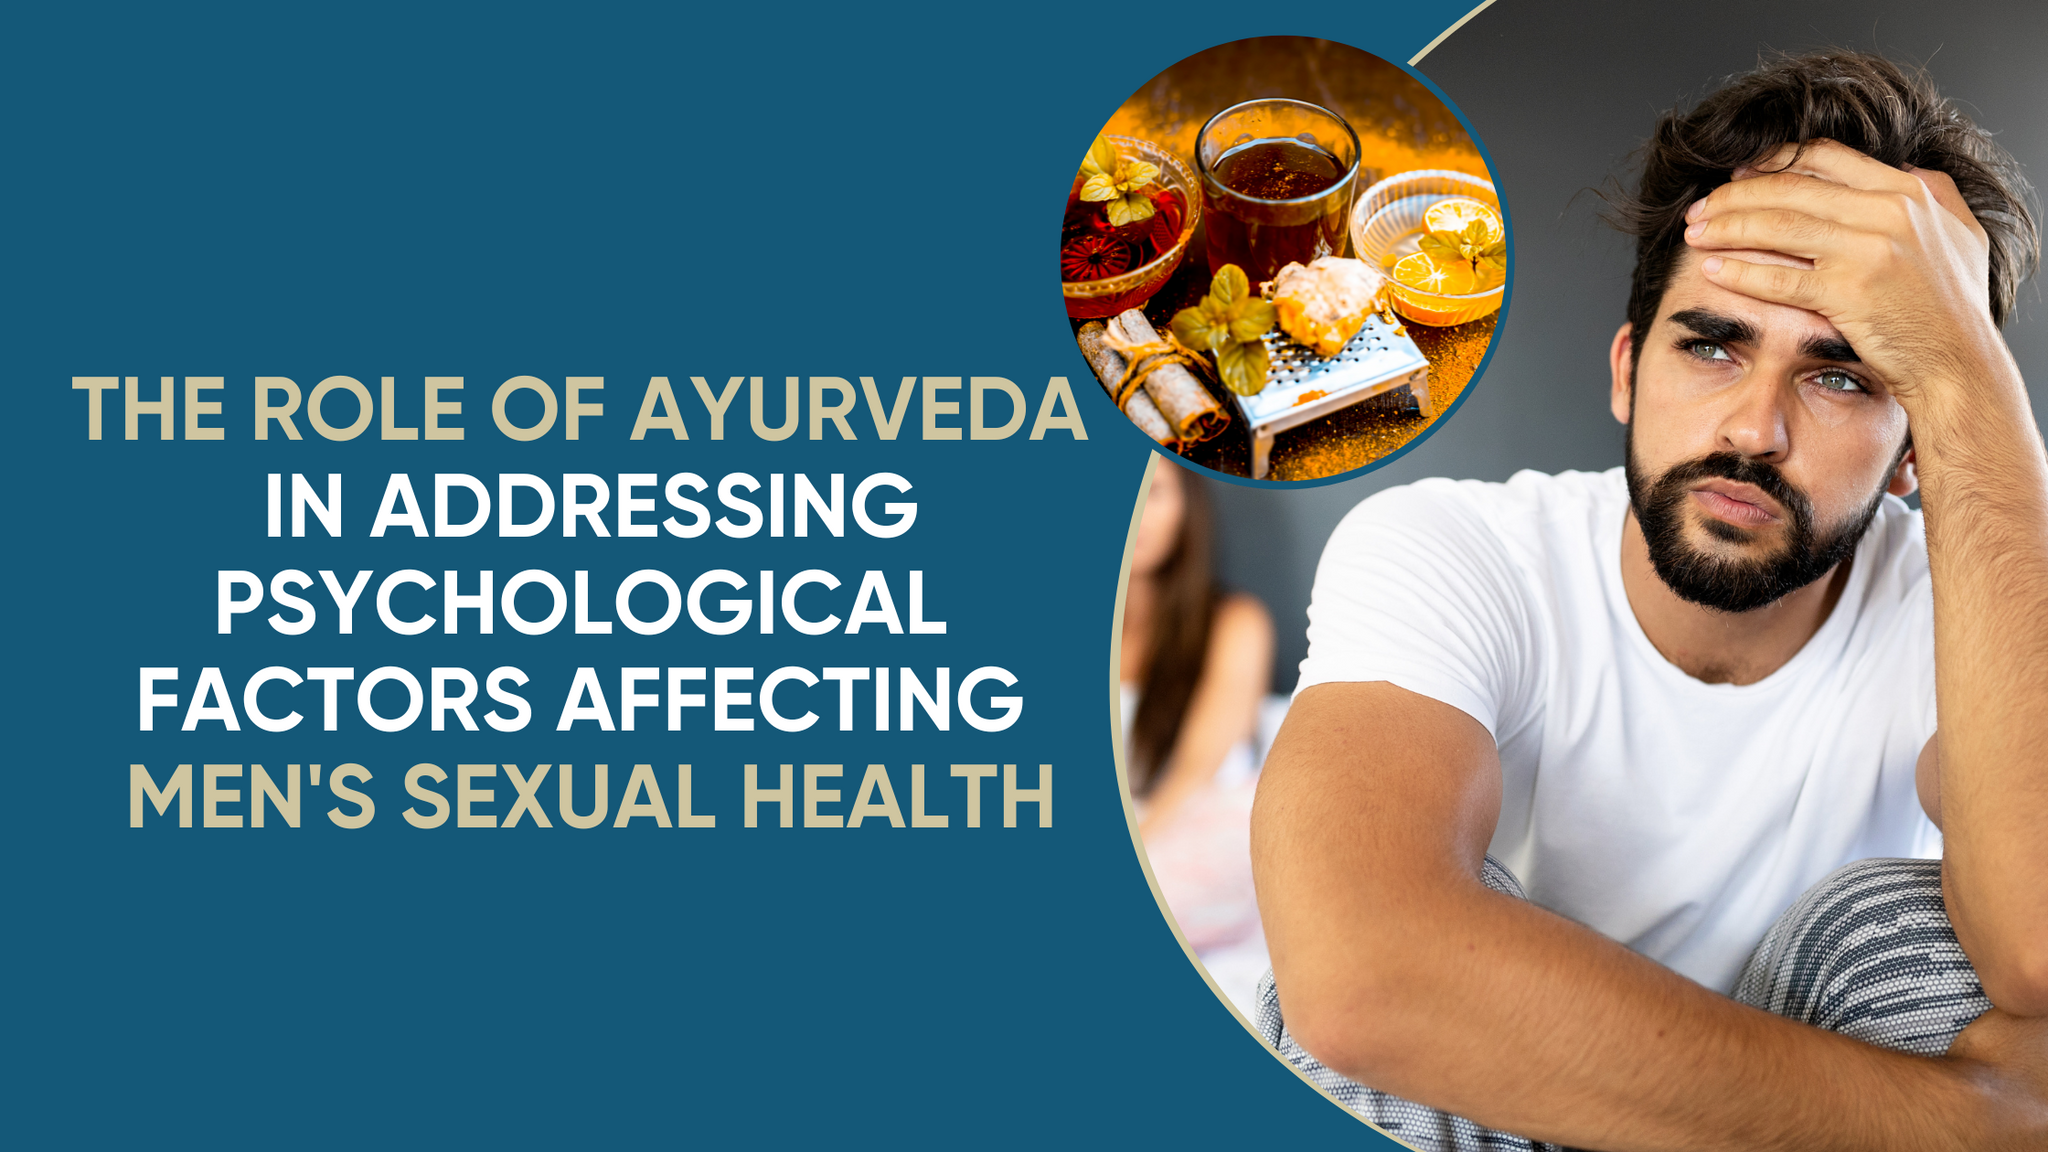 <p><b>THE ROLE OF AYURVEDA IN ADDRESSING PSYCHOLOGICAL FACTORS  AFFECTING  MEN'S  SEXUAL HEALTH</b></p> <p> </p>